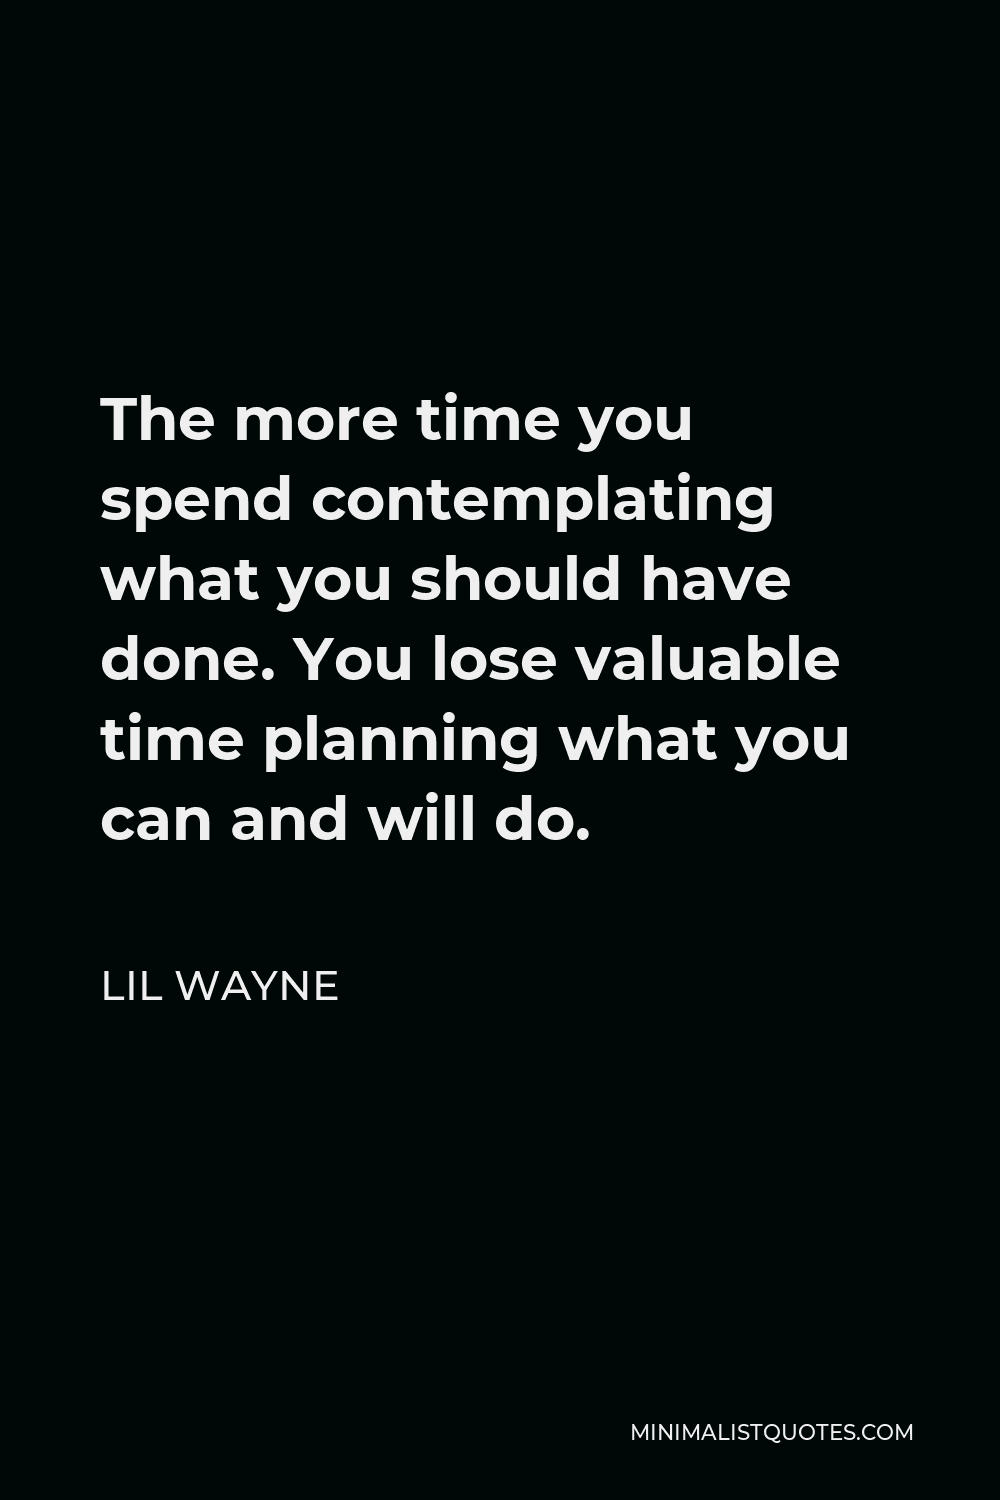 Lil Wayne Quote - The more time you spend contemplating what you should have done. You lose valuable time planning what you can and will do.